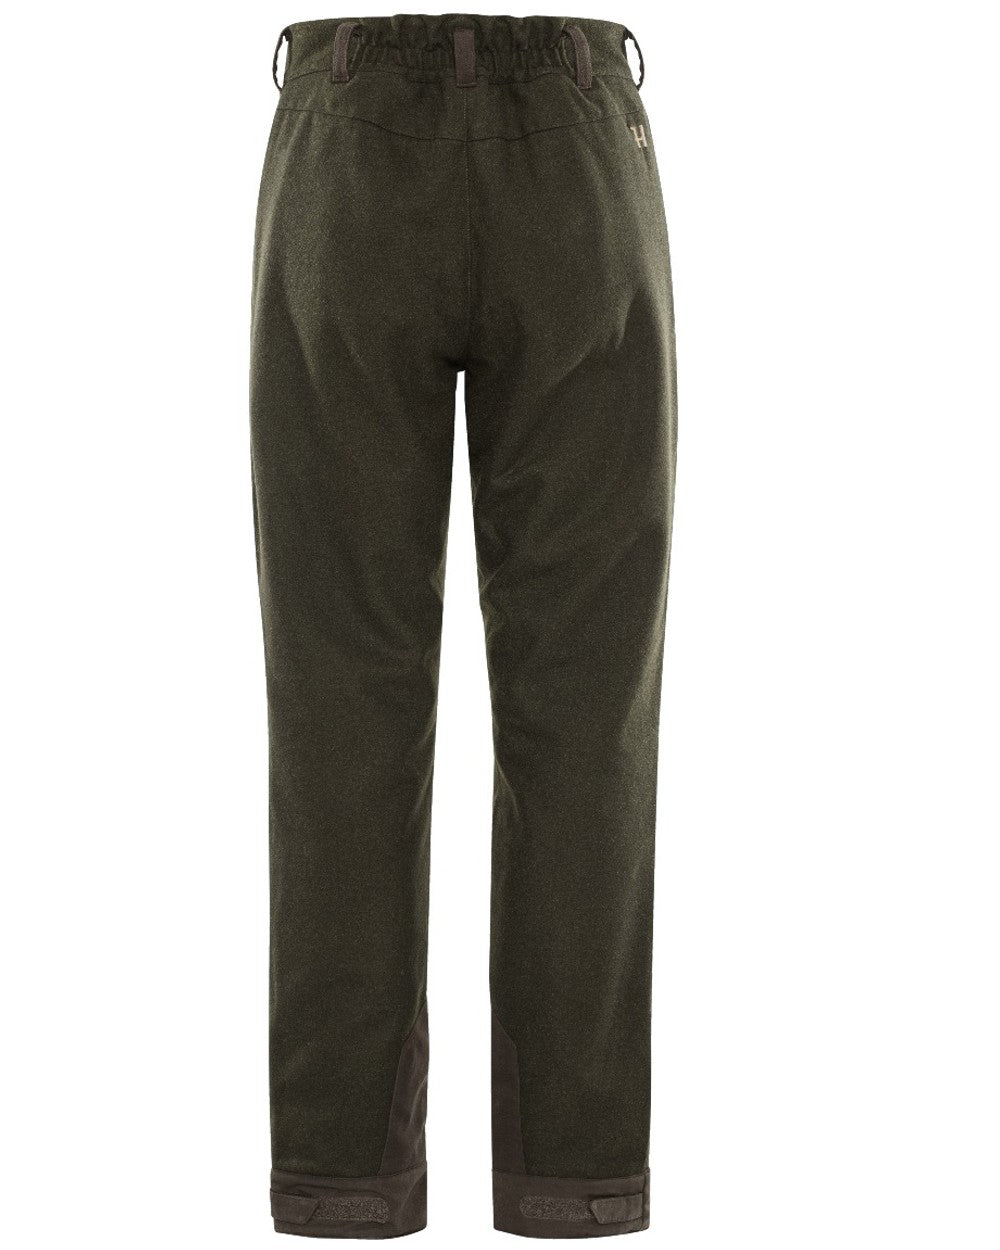 Willow Green Shadow Brown coloured Harkila Metso Womens Winter Trousers on white background 